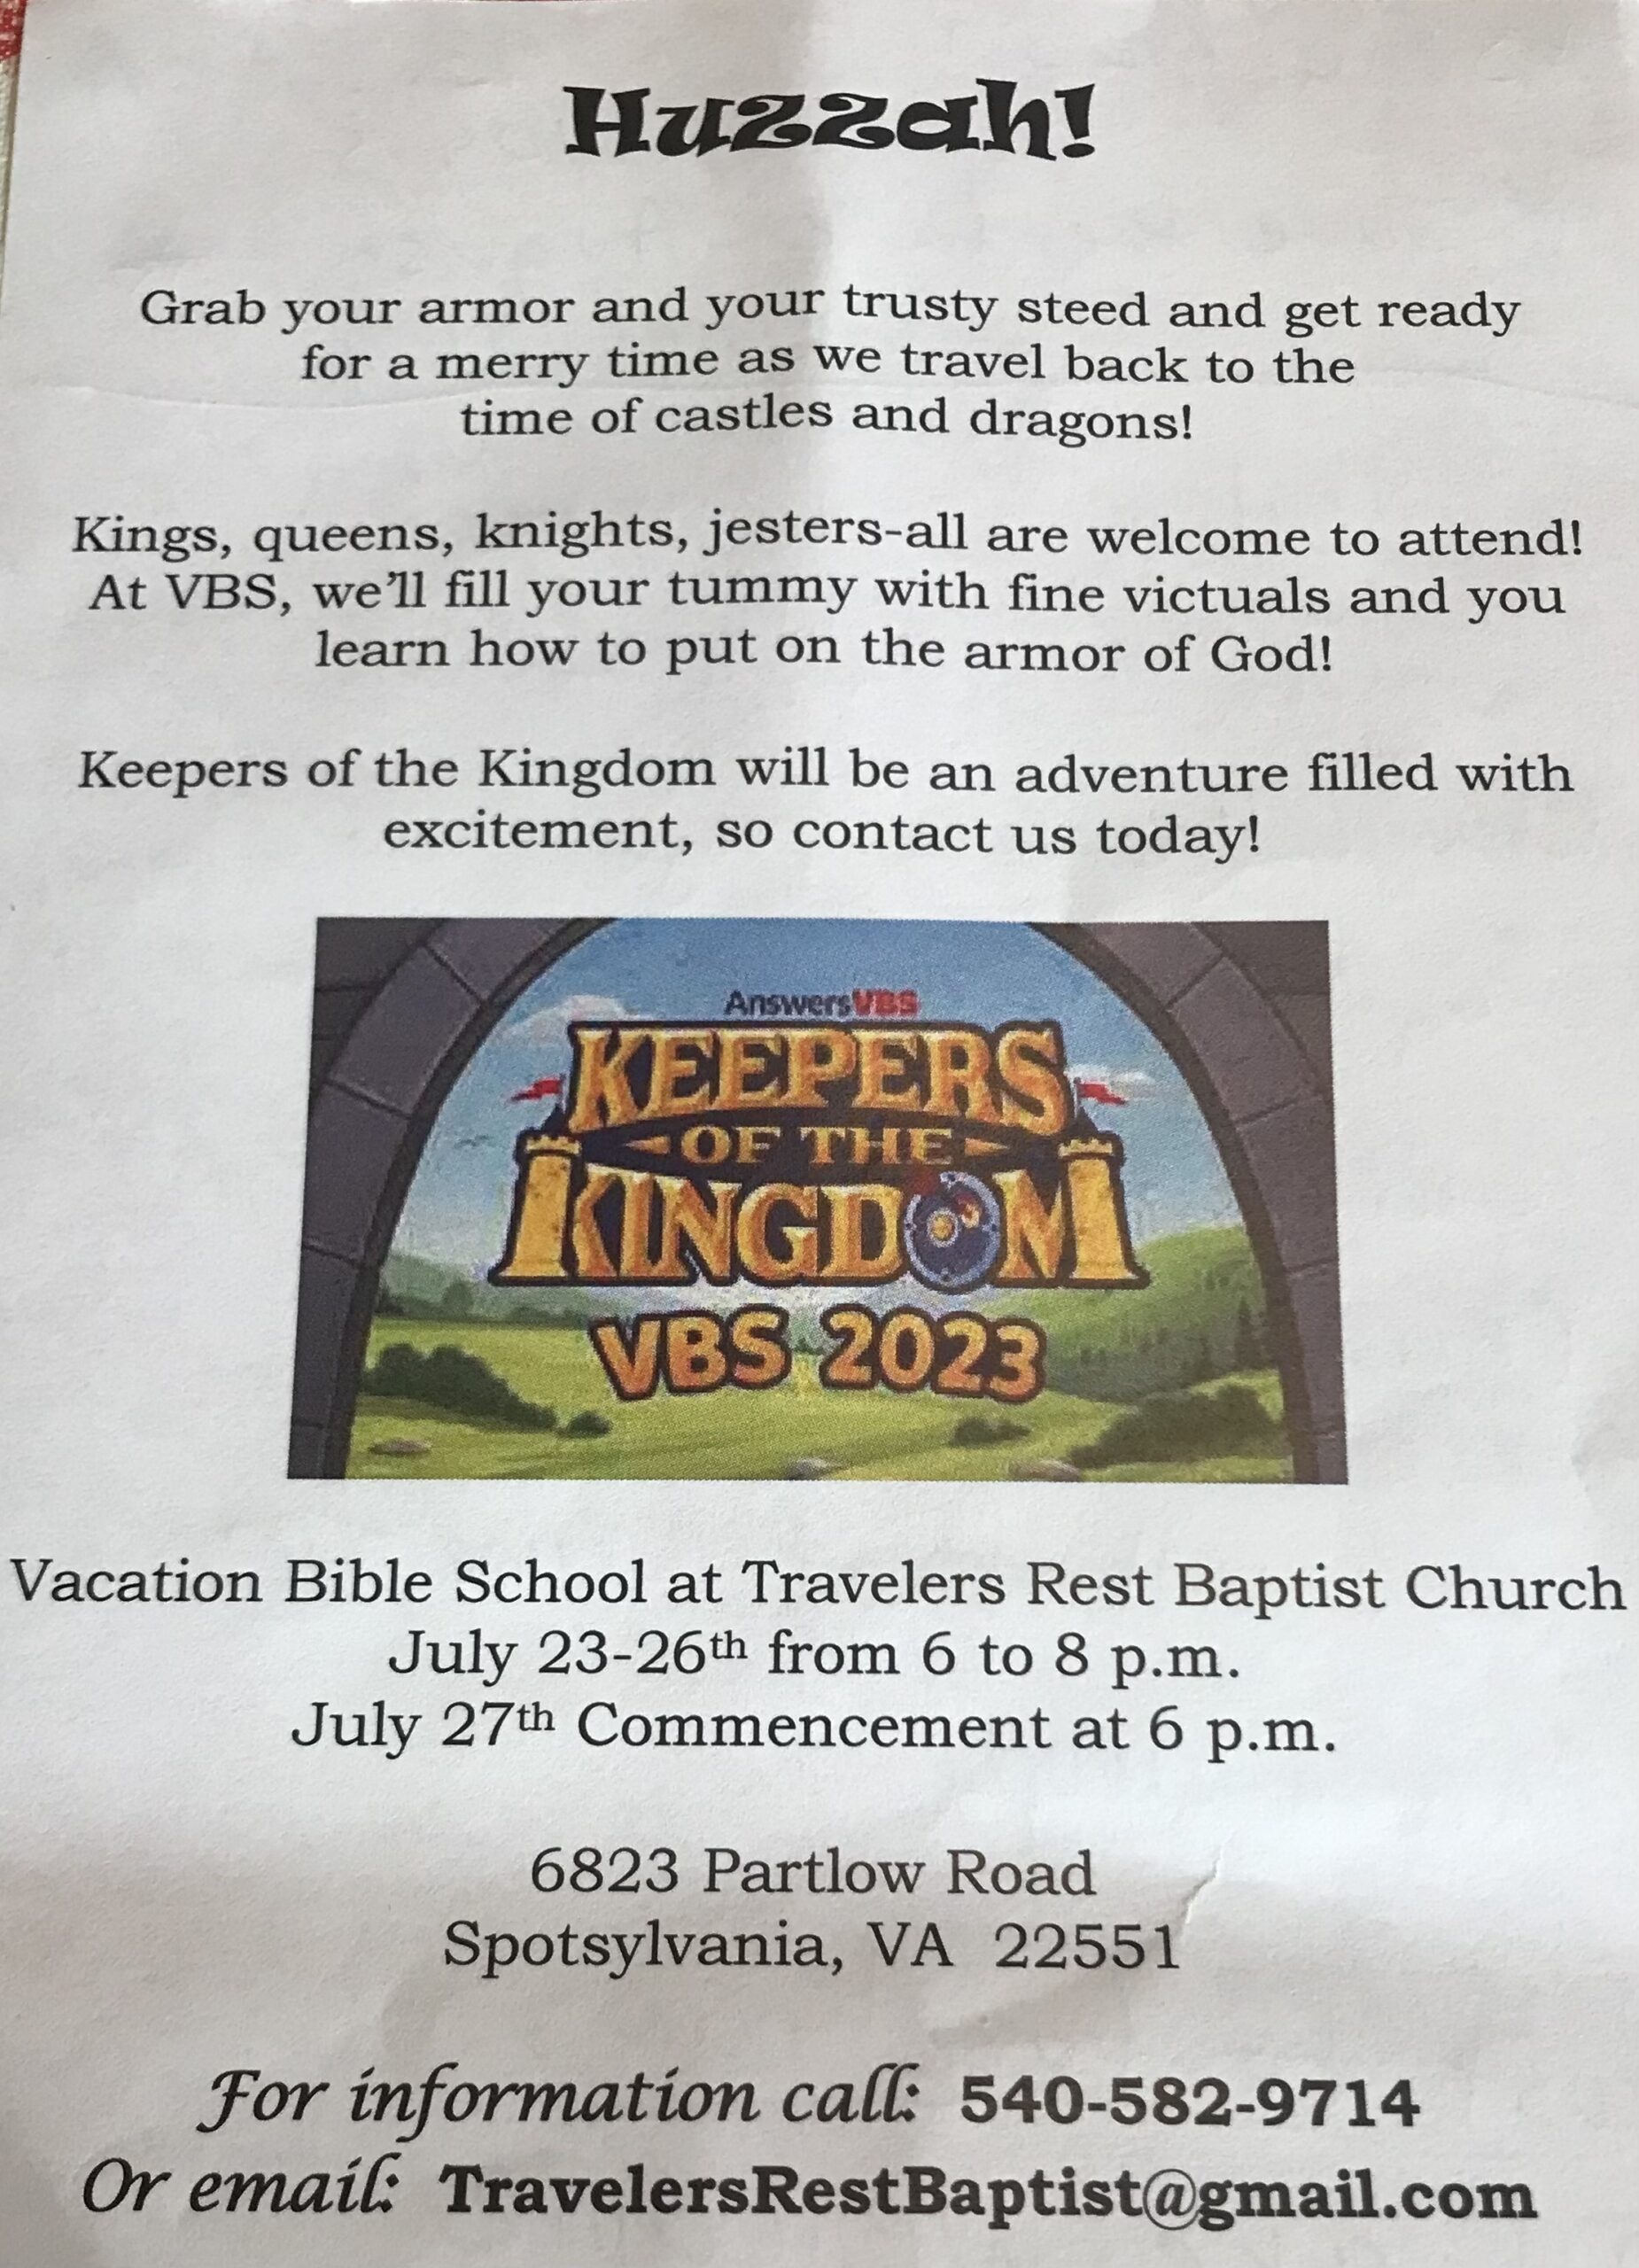 <h1 class="tribe-events-single-event-title">Travelers Rest Baptist Church Vacation Bible School</h1>